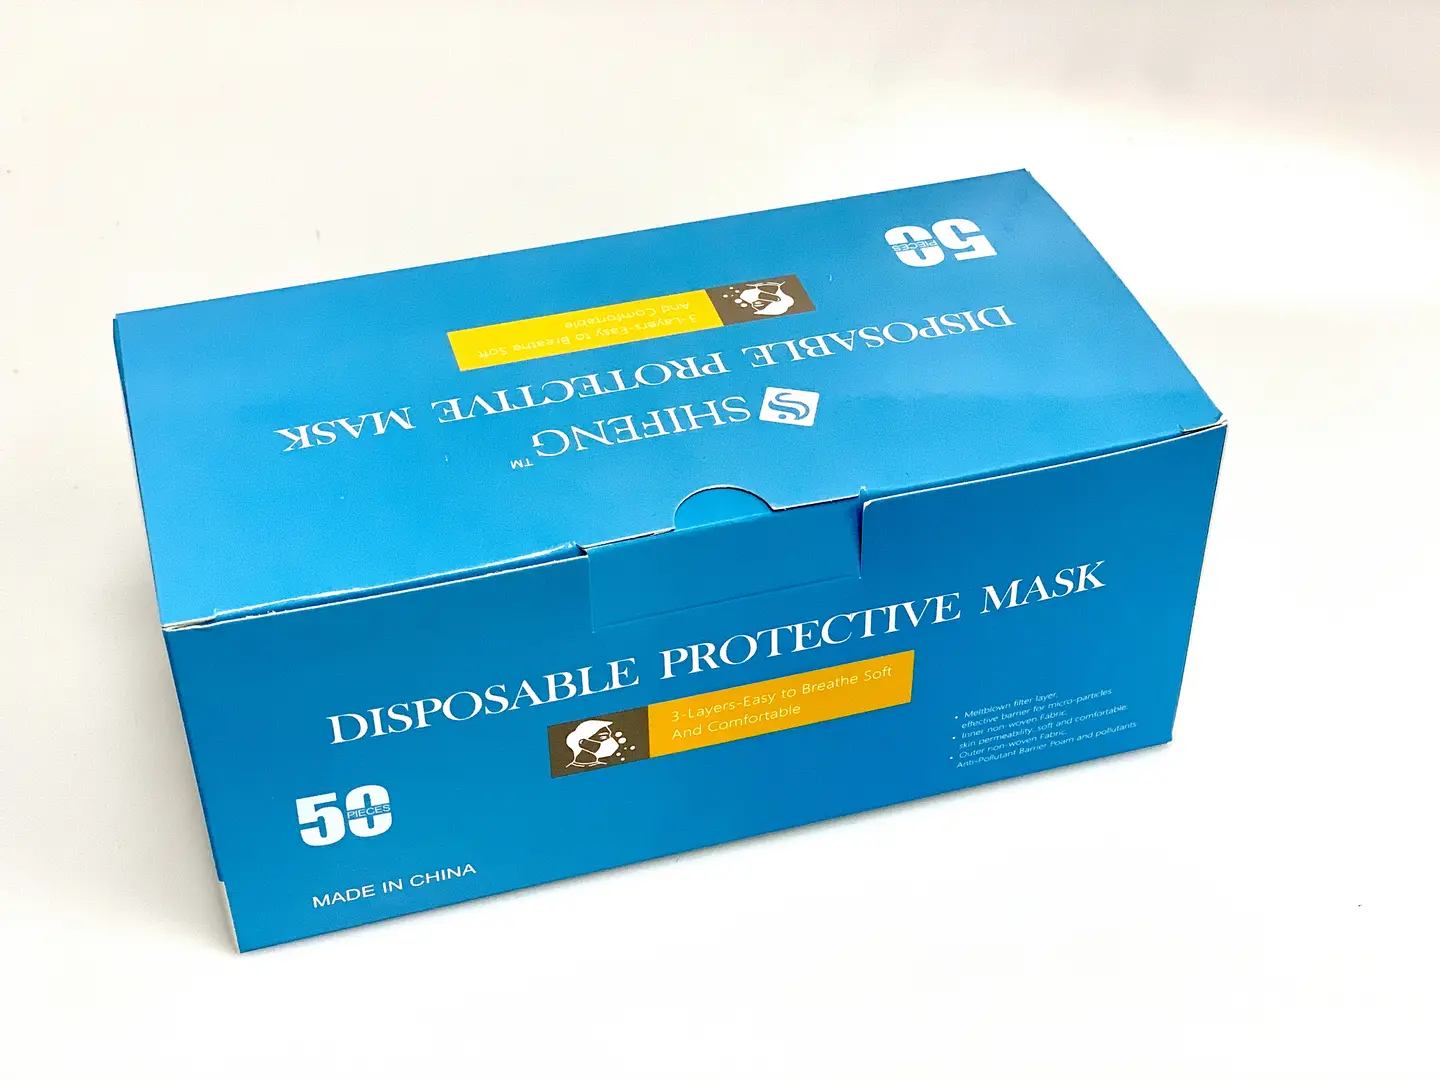 A Disposable Protective Mask Box in Blue Color